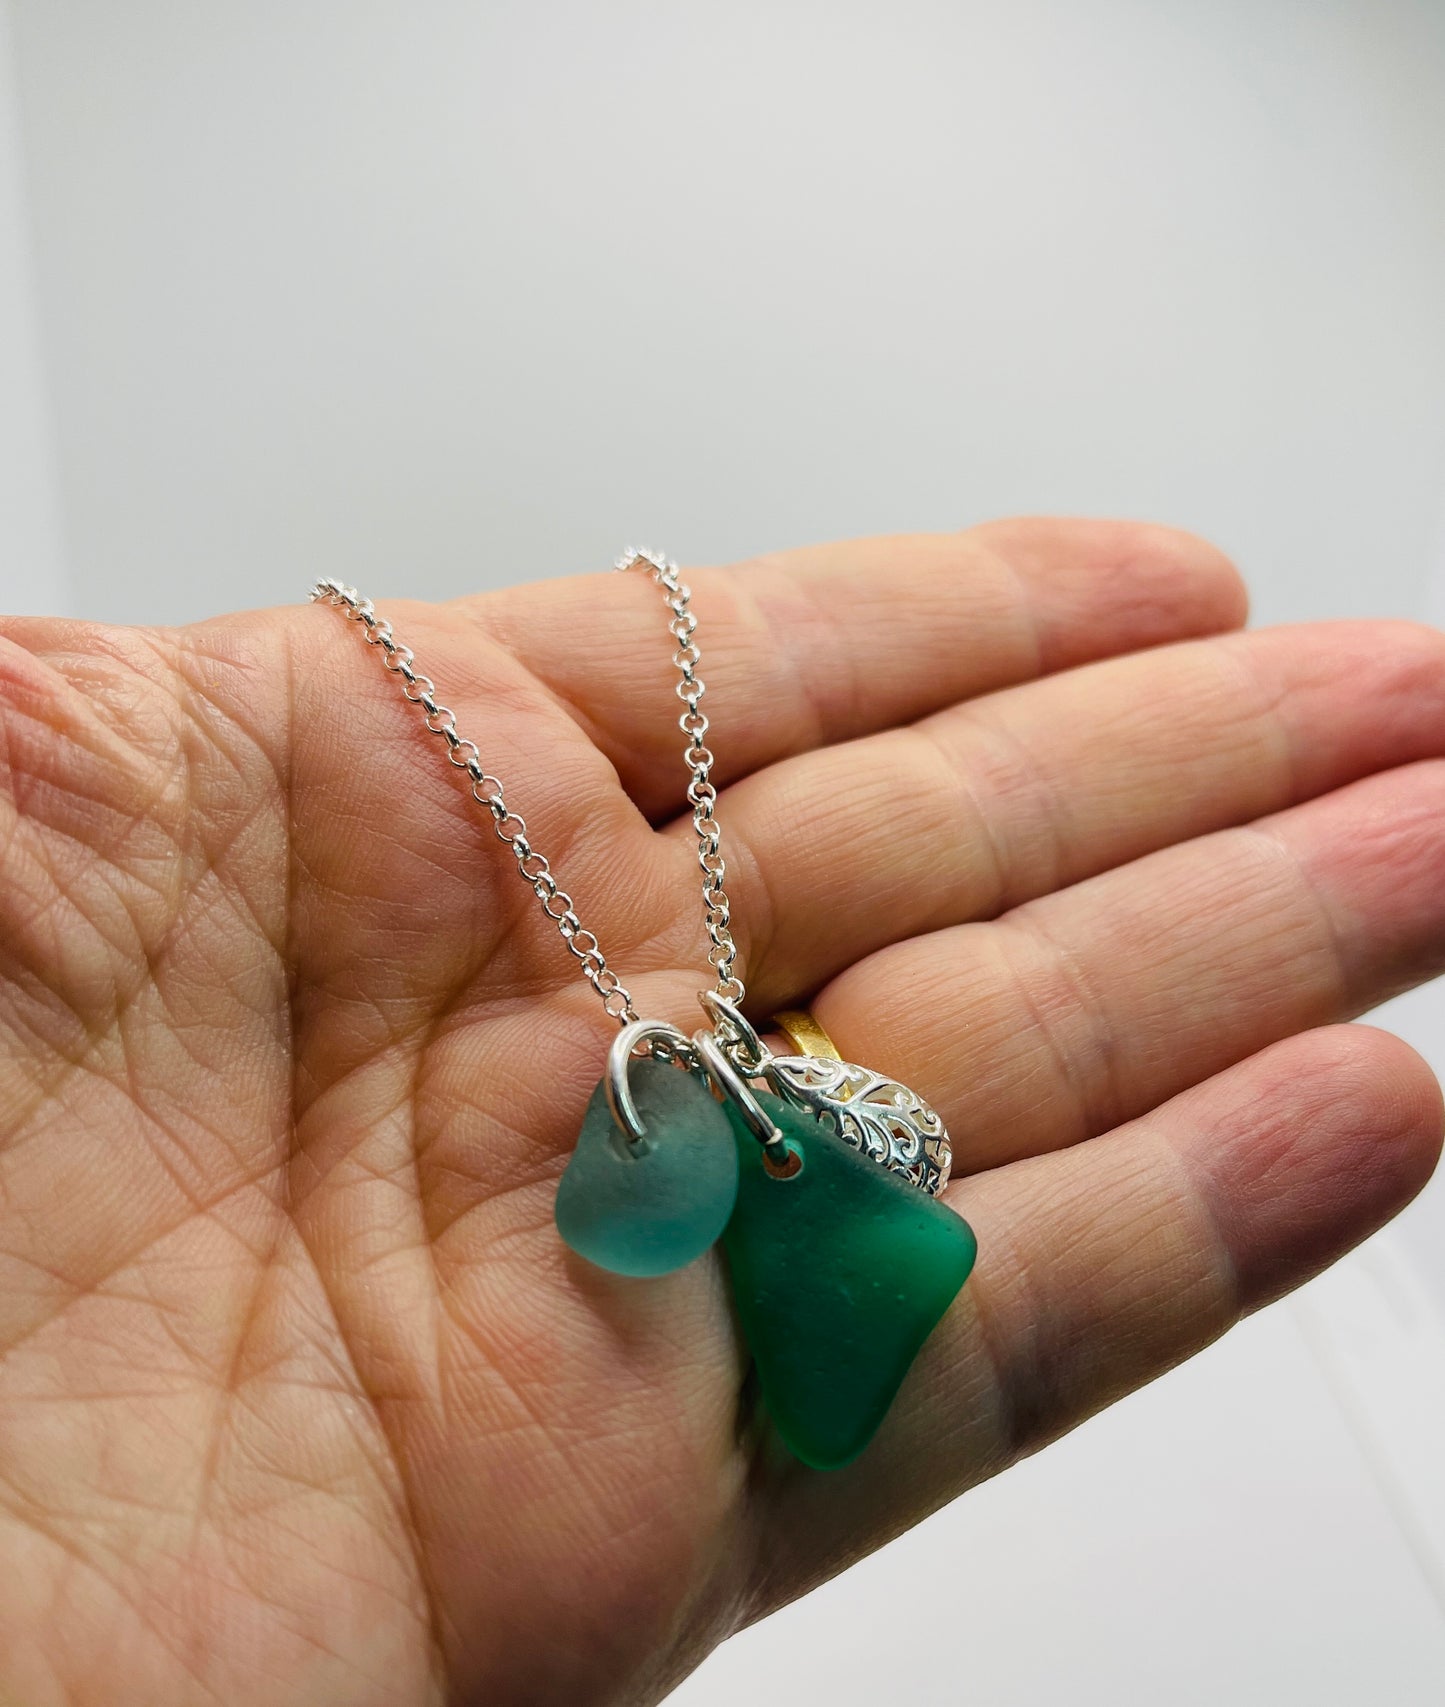 Seaglass Greens Charm Necklace